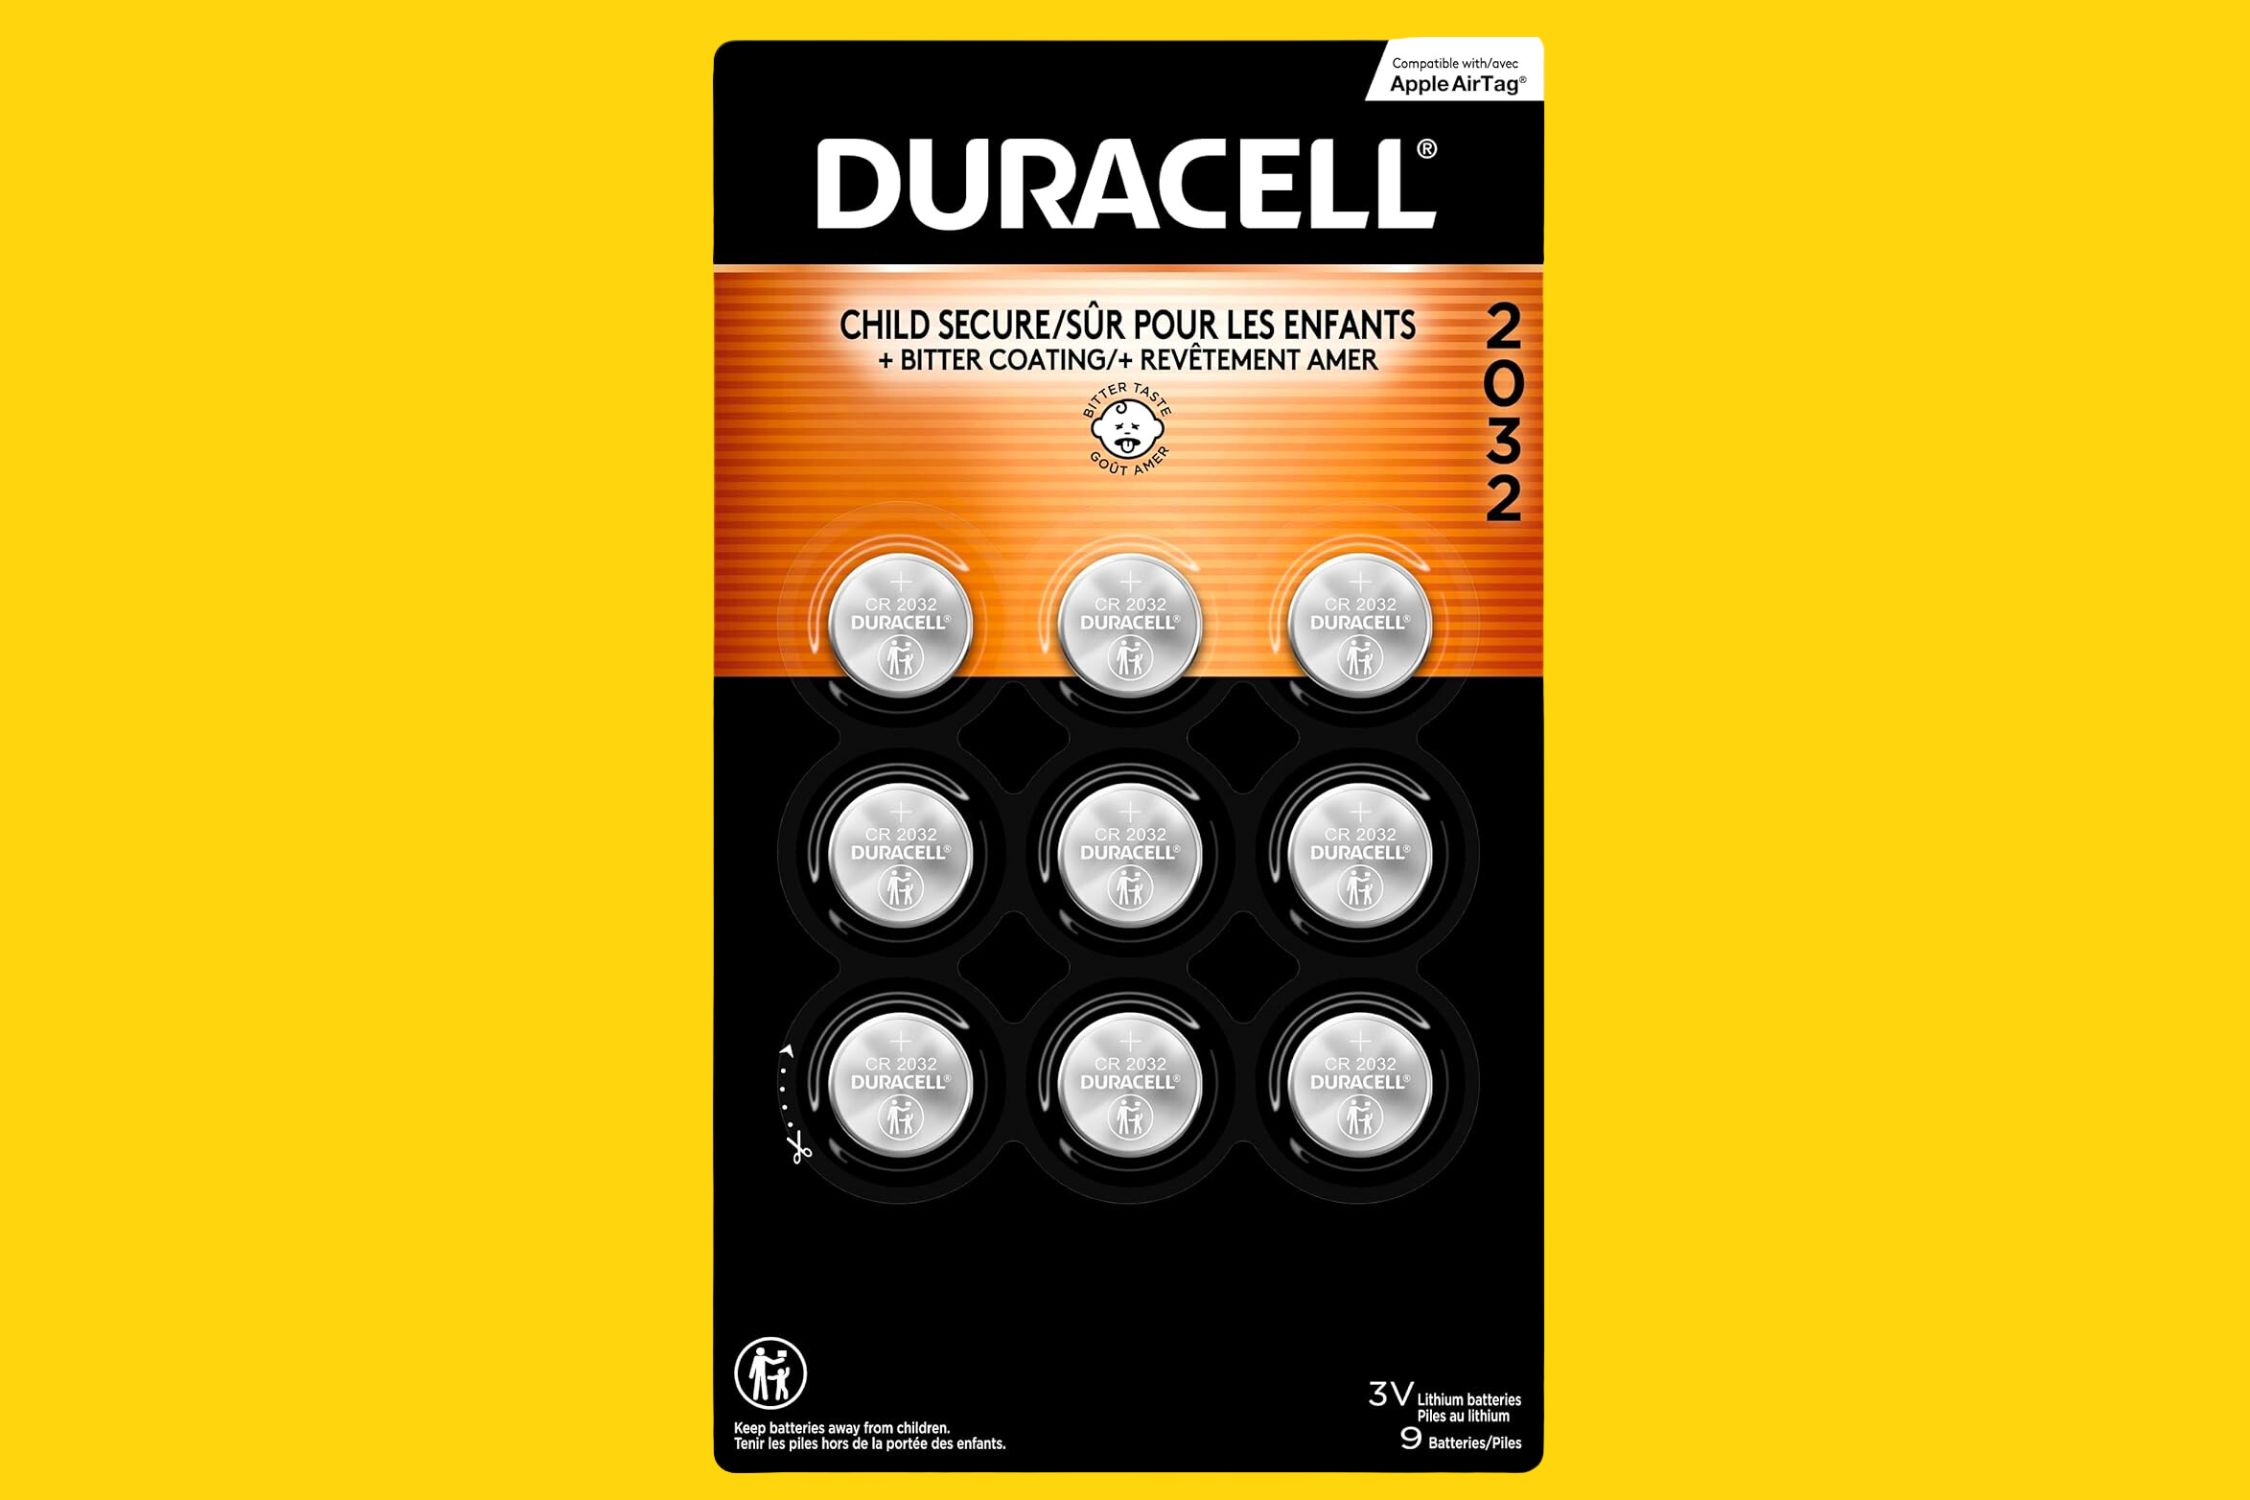 Duracell CR2032 3V Lithium Battery, as Low as $10.62 on